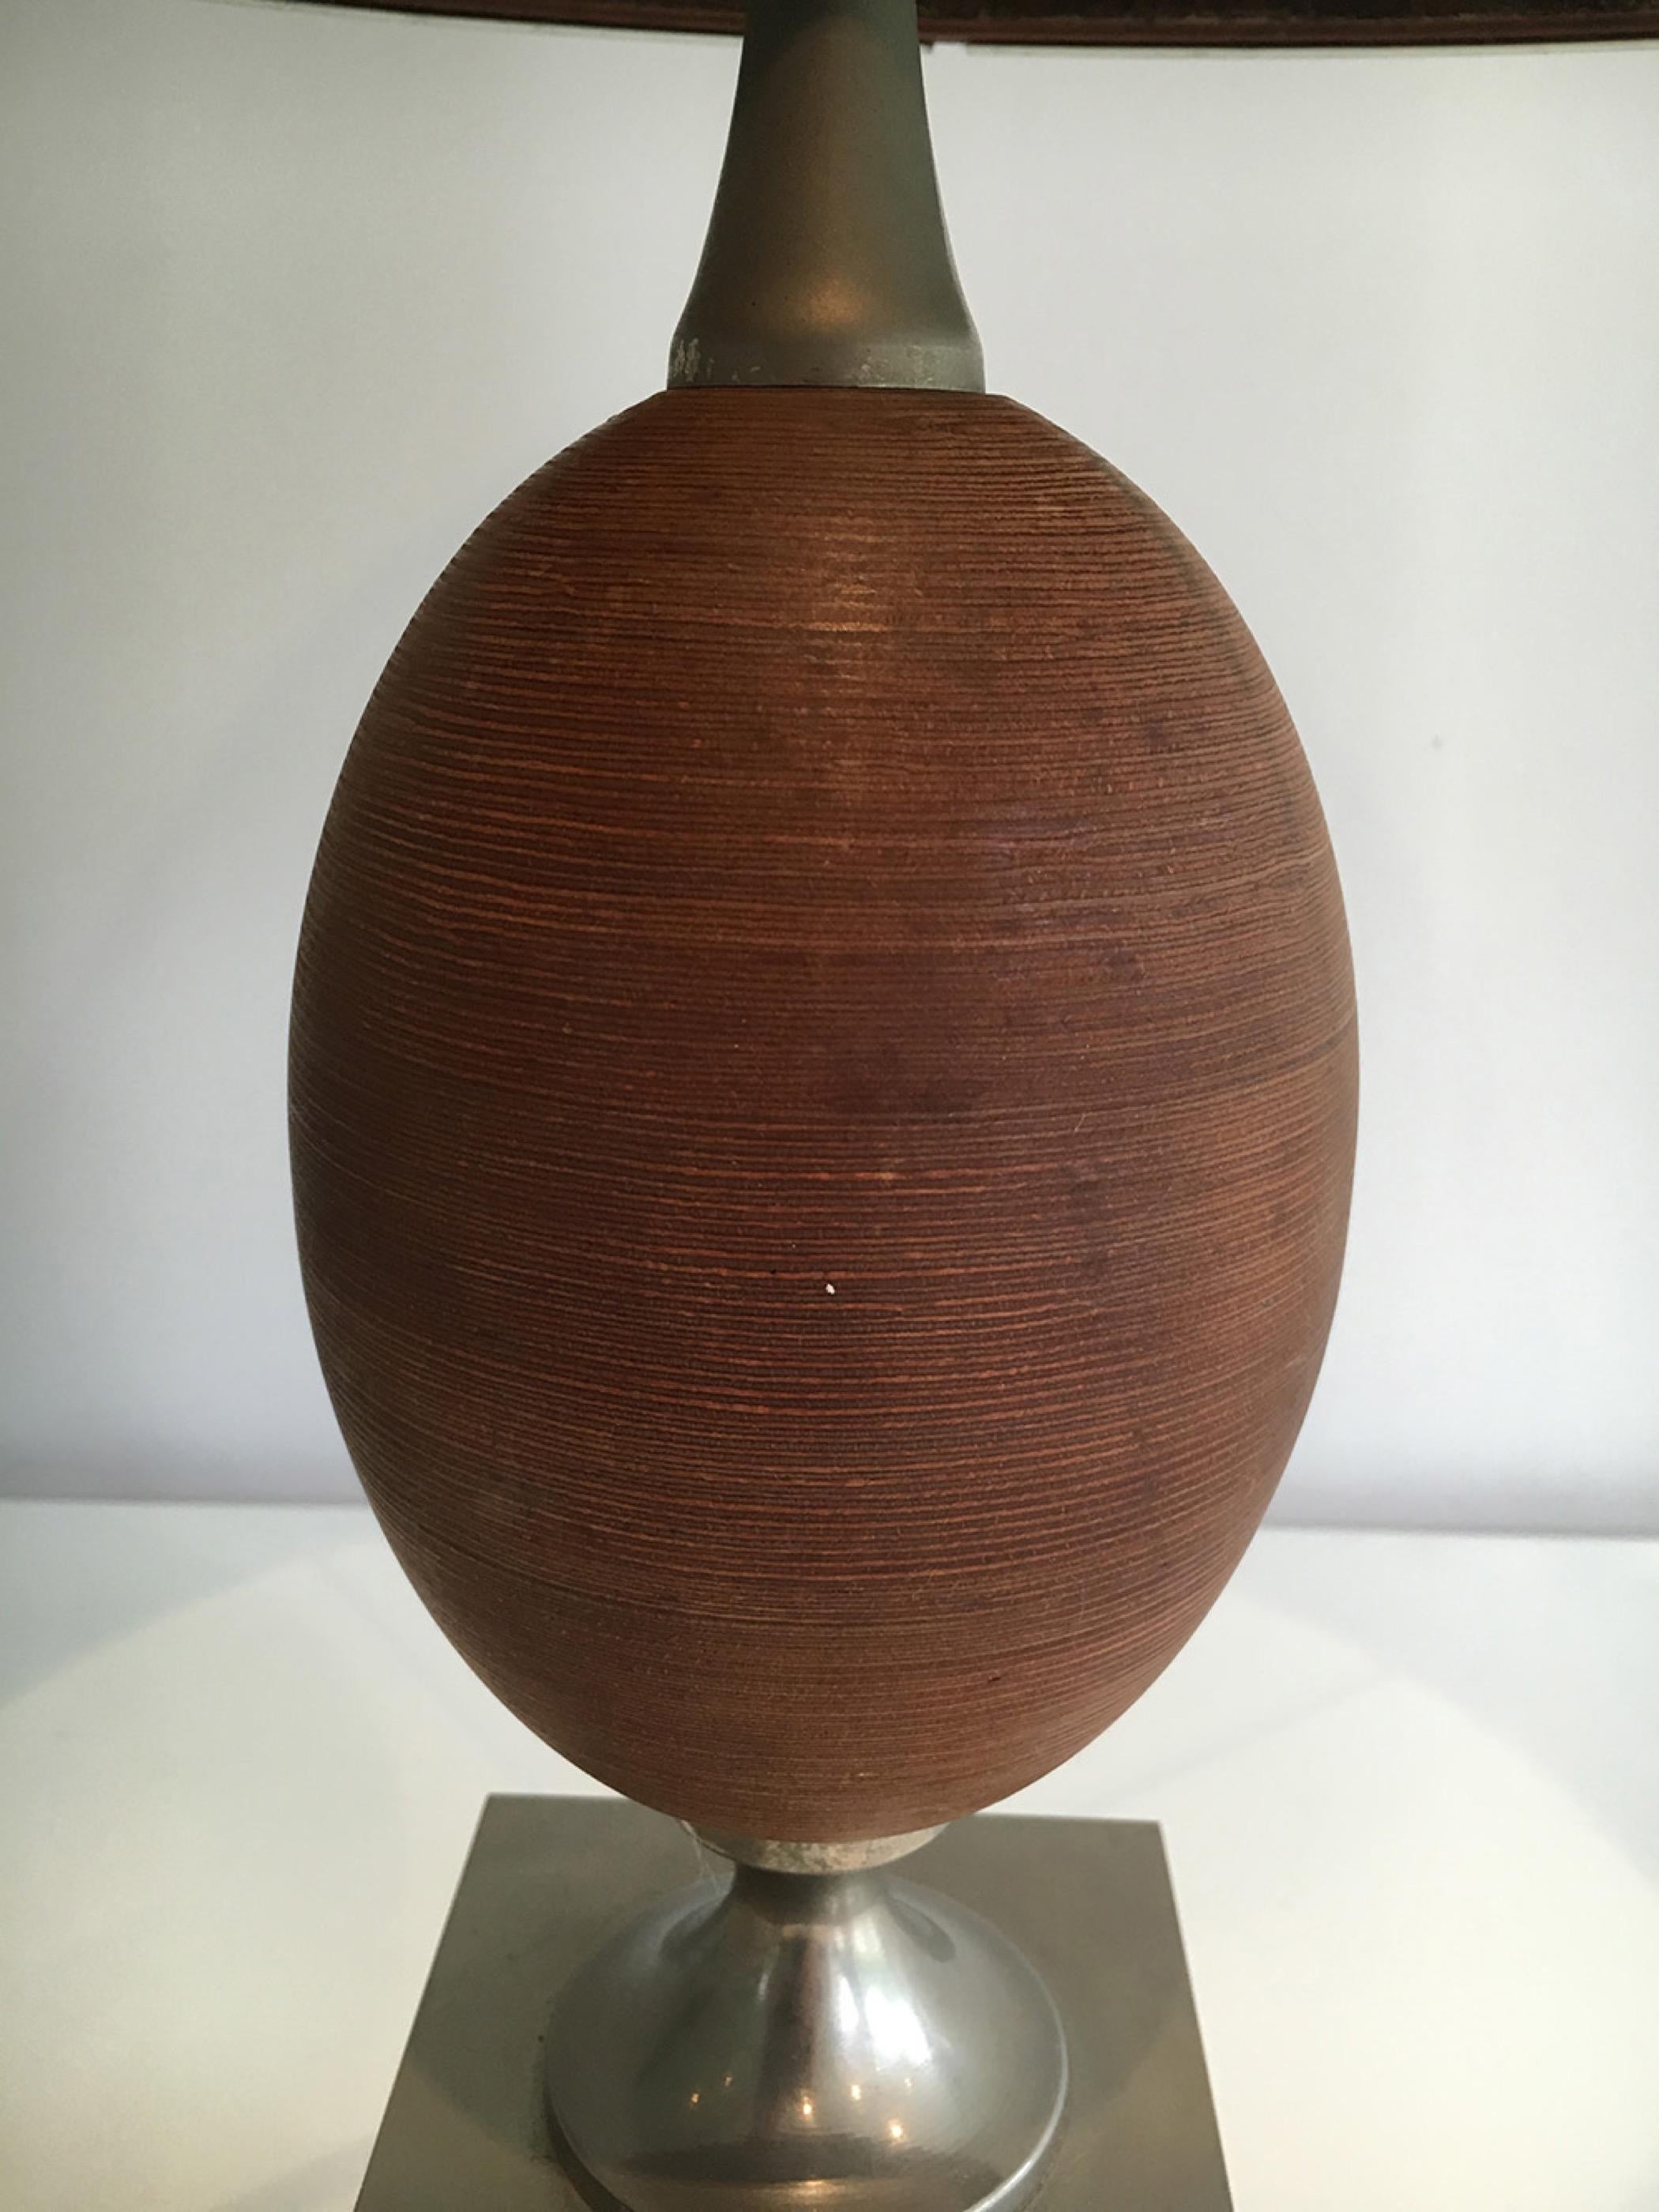 Wood and Brushed Steel Egg Lamp with Wooden Shade, circa 1970 For Sale 1